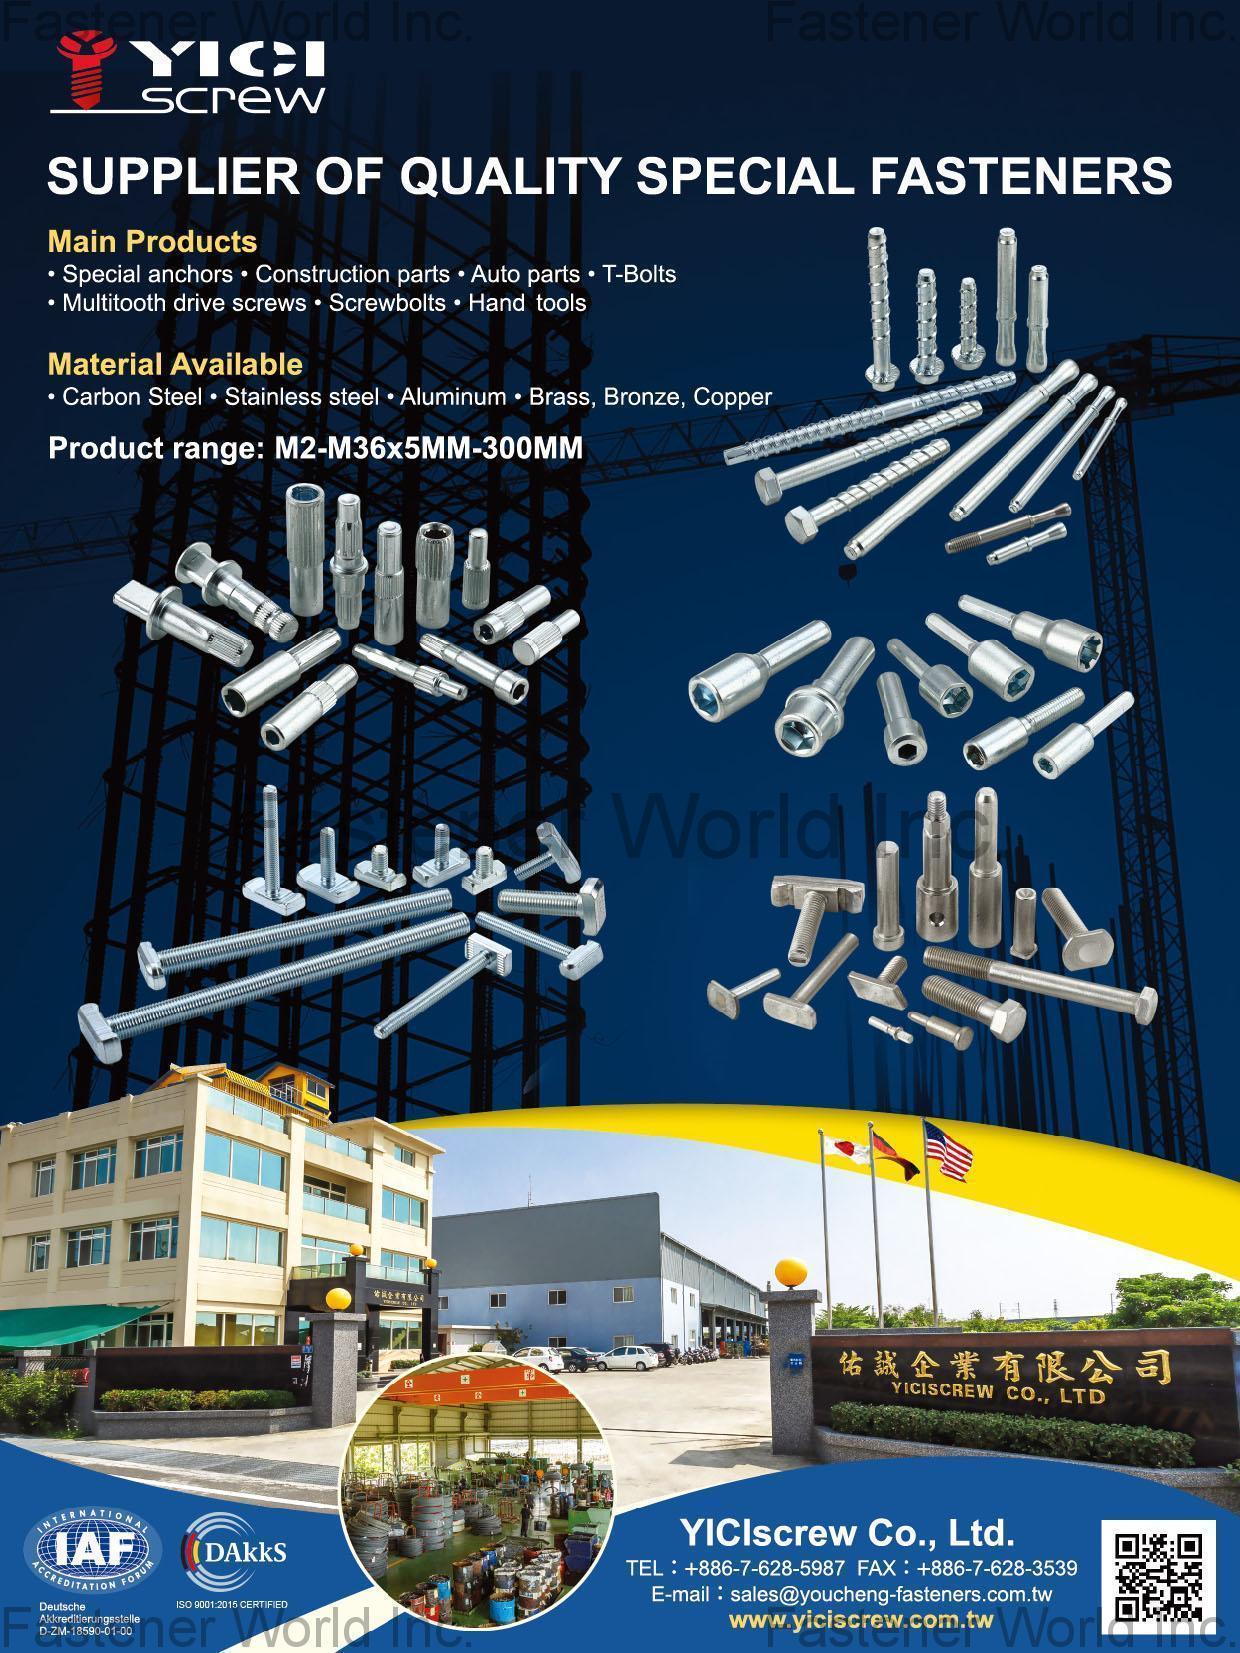 YICIscrew CO., LTD. , Special Anchors, Construction Parts, Auto Parts, T-Bolts, Multitooth Drive Screws, Screwbolts, Hand Tools , T-head Or T-slot Bolts